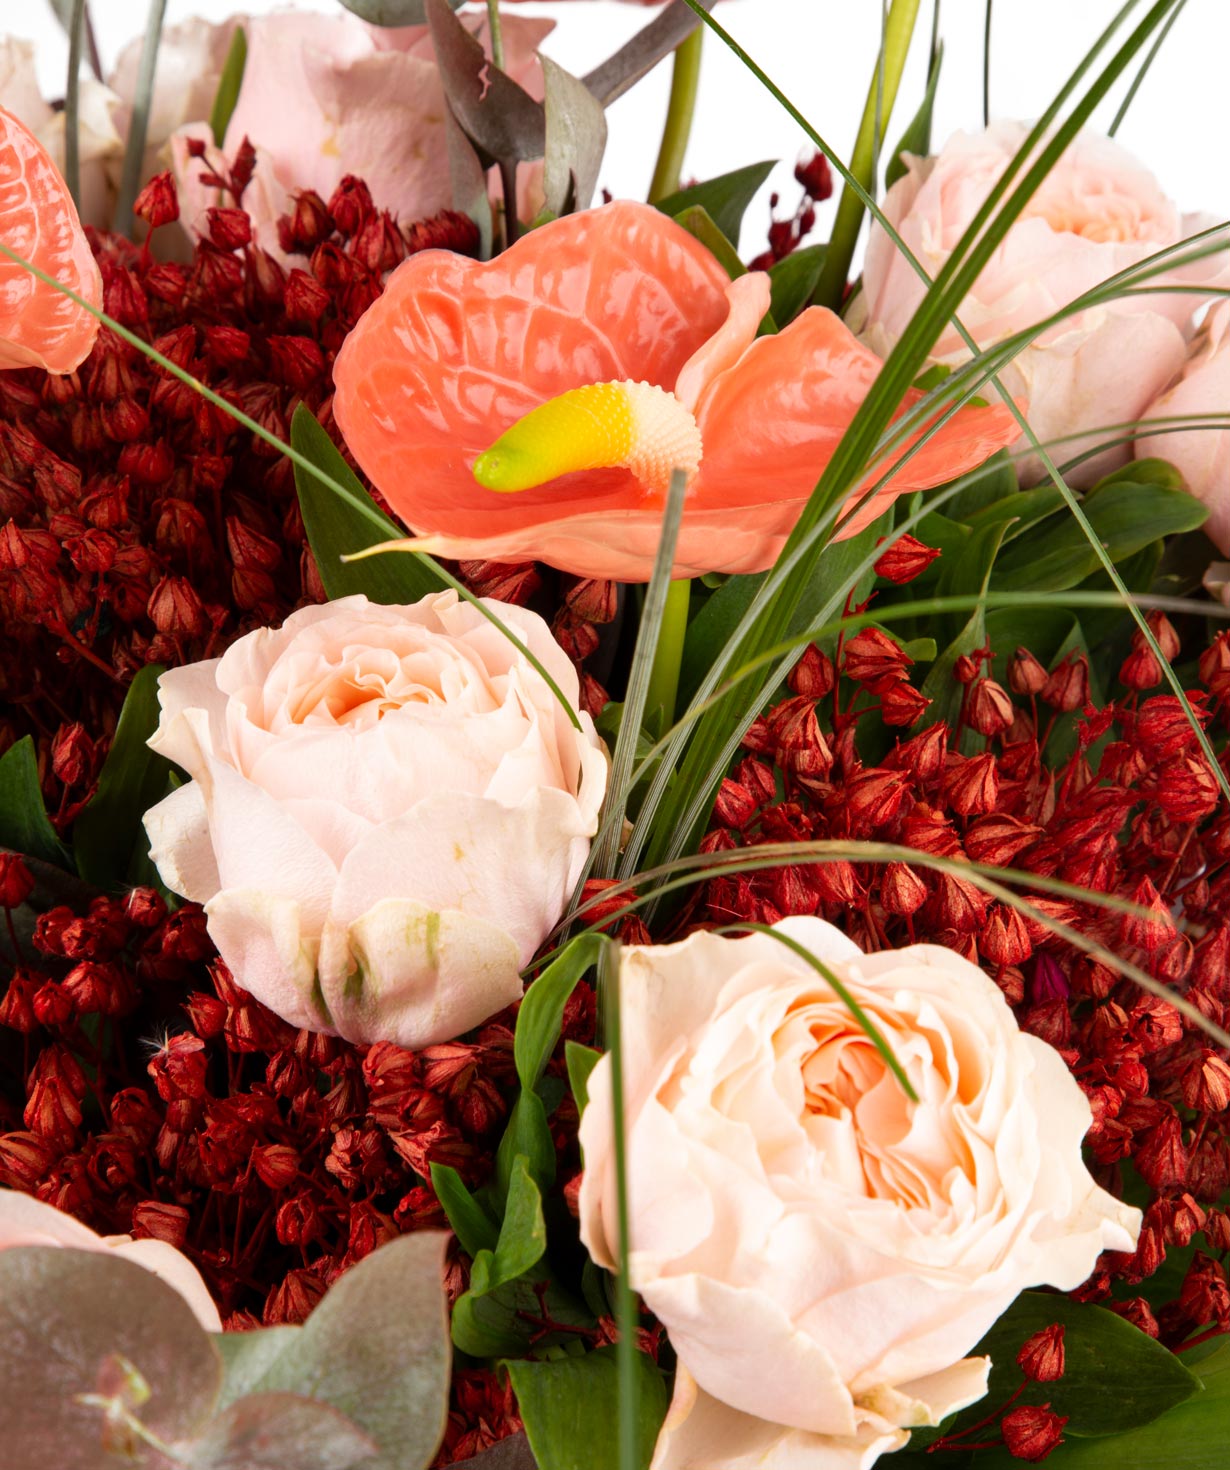 Bouquet  `Polotsk` of roses, anthurium, dried flowers